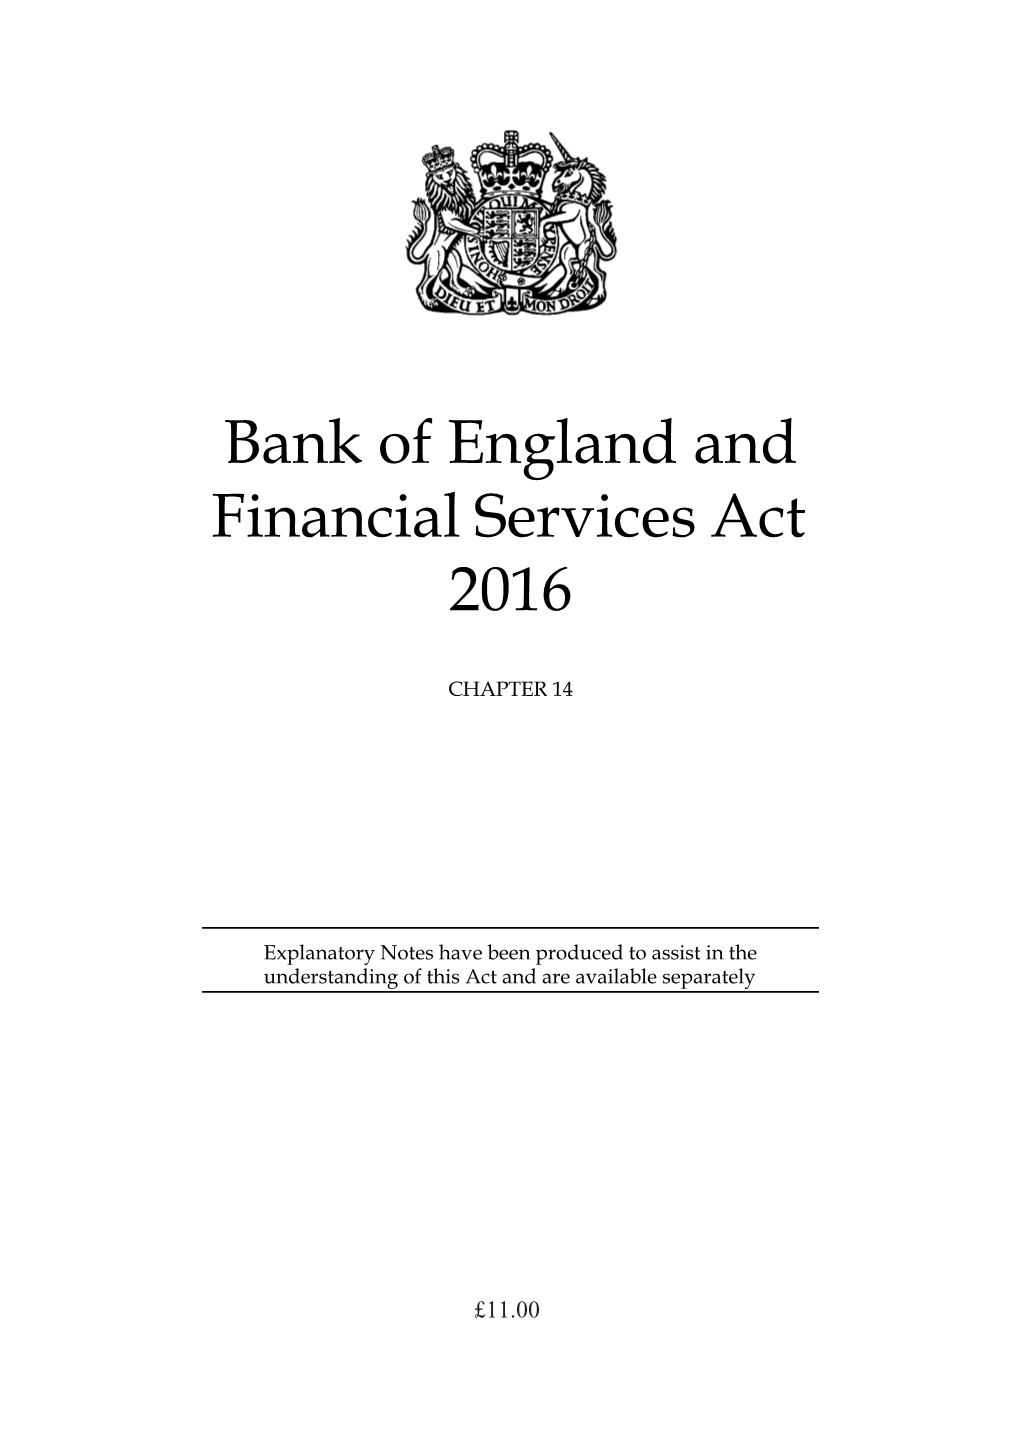 Bank of England and Financial Services Act 2016